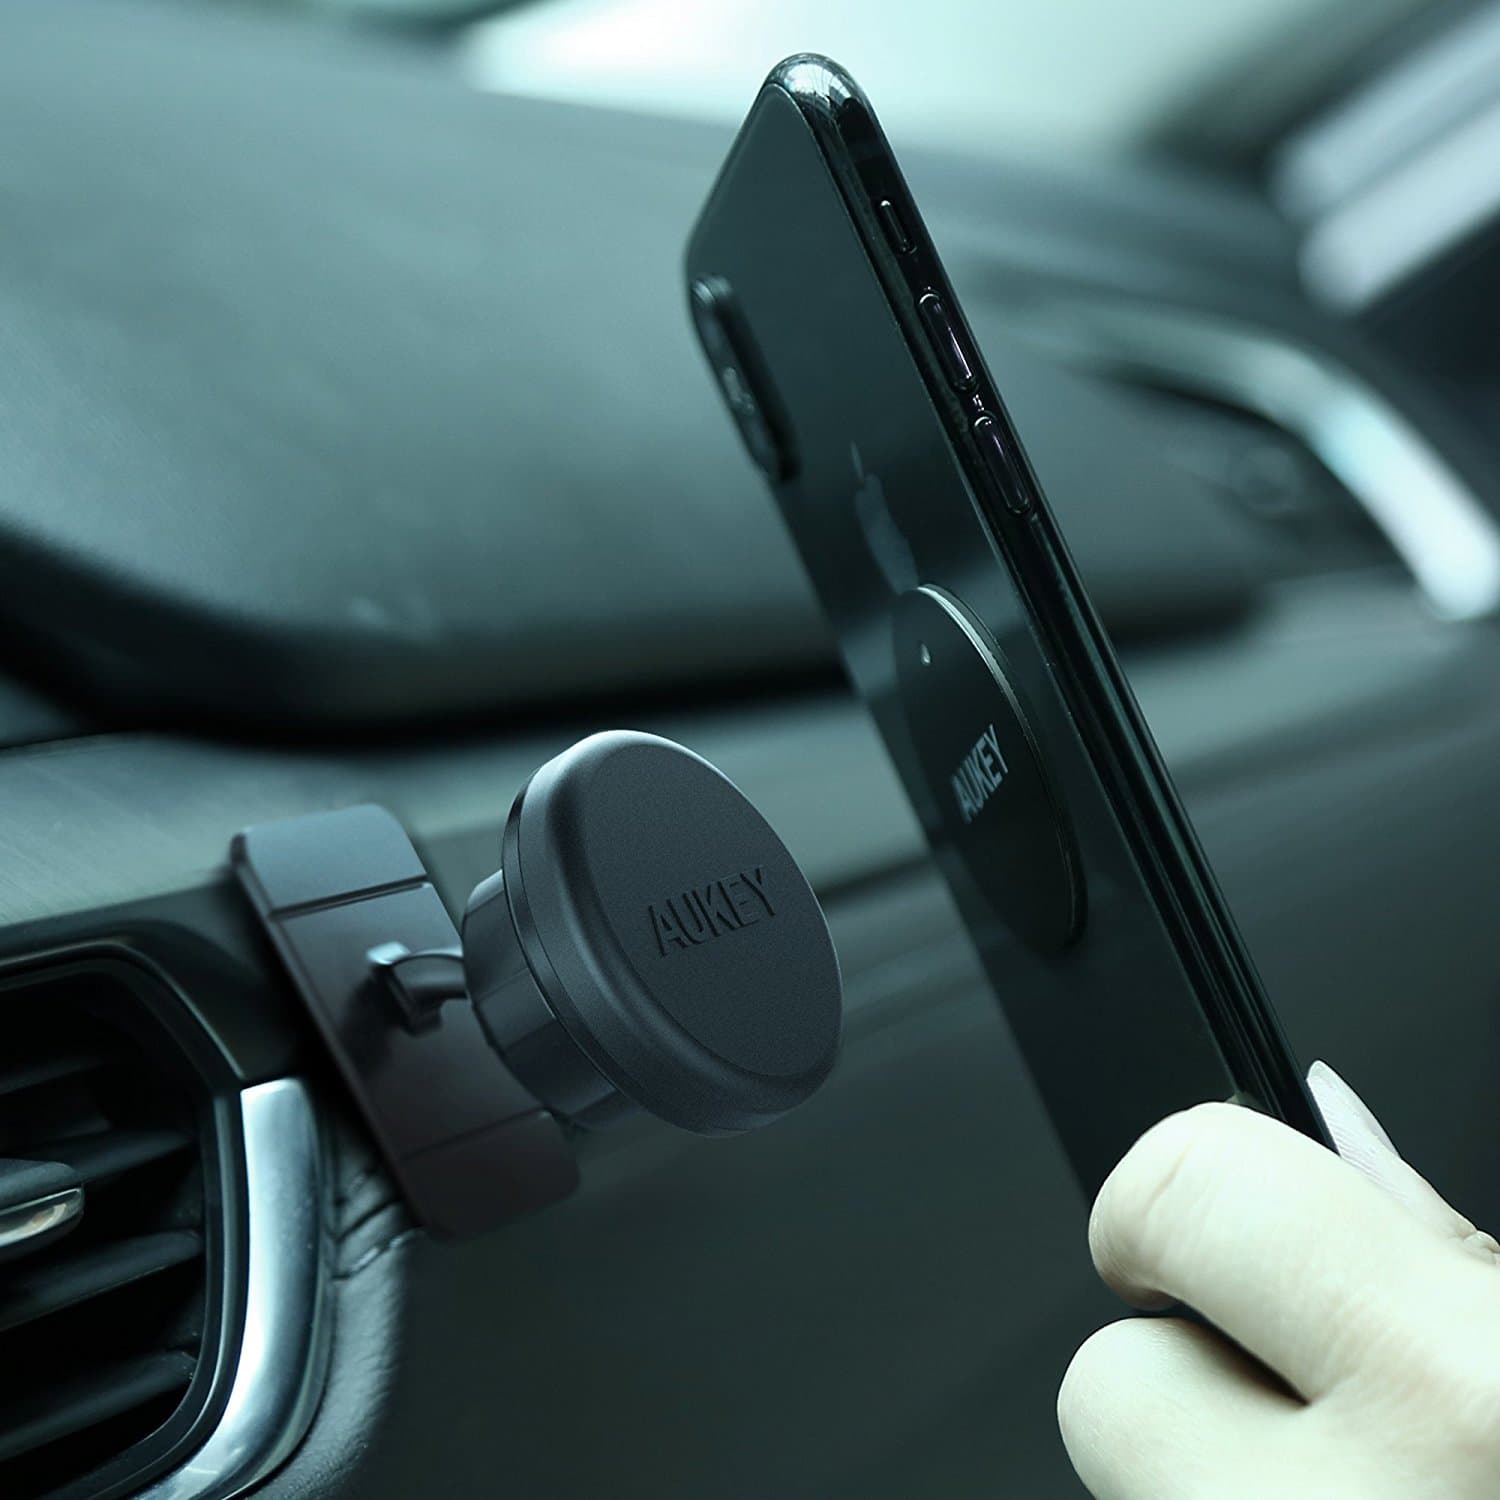 AUKEY HD-C13 New Universal Magnetic dashboard car phone mount holder